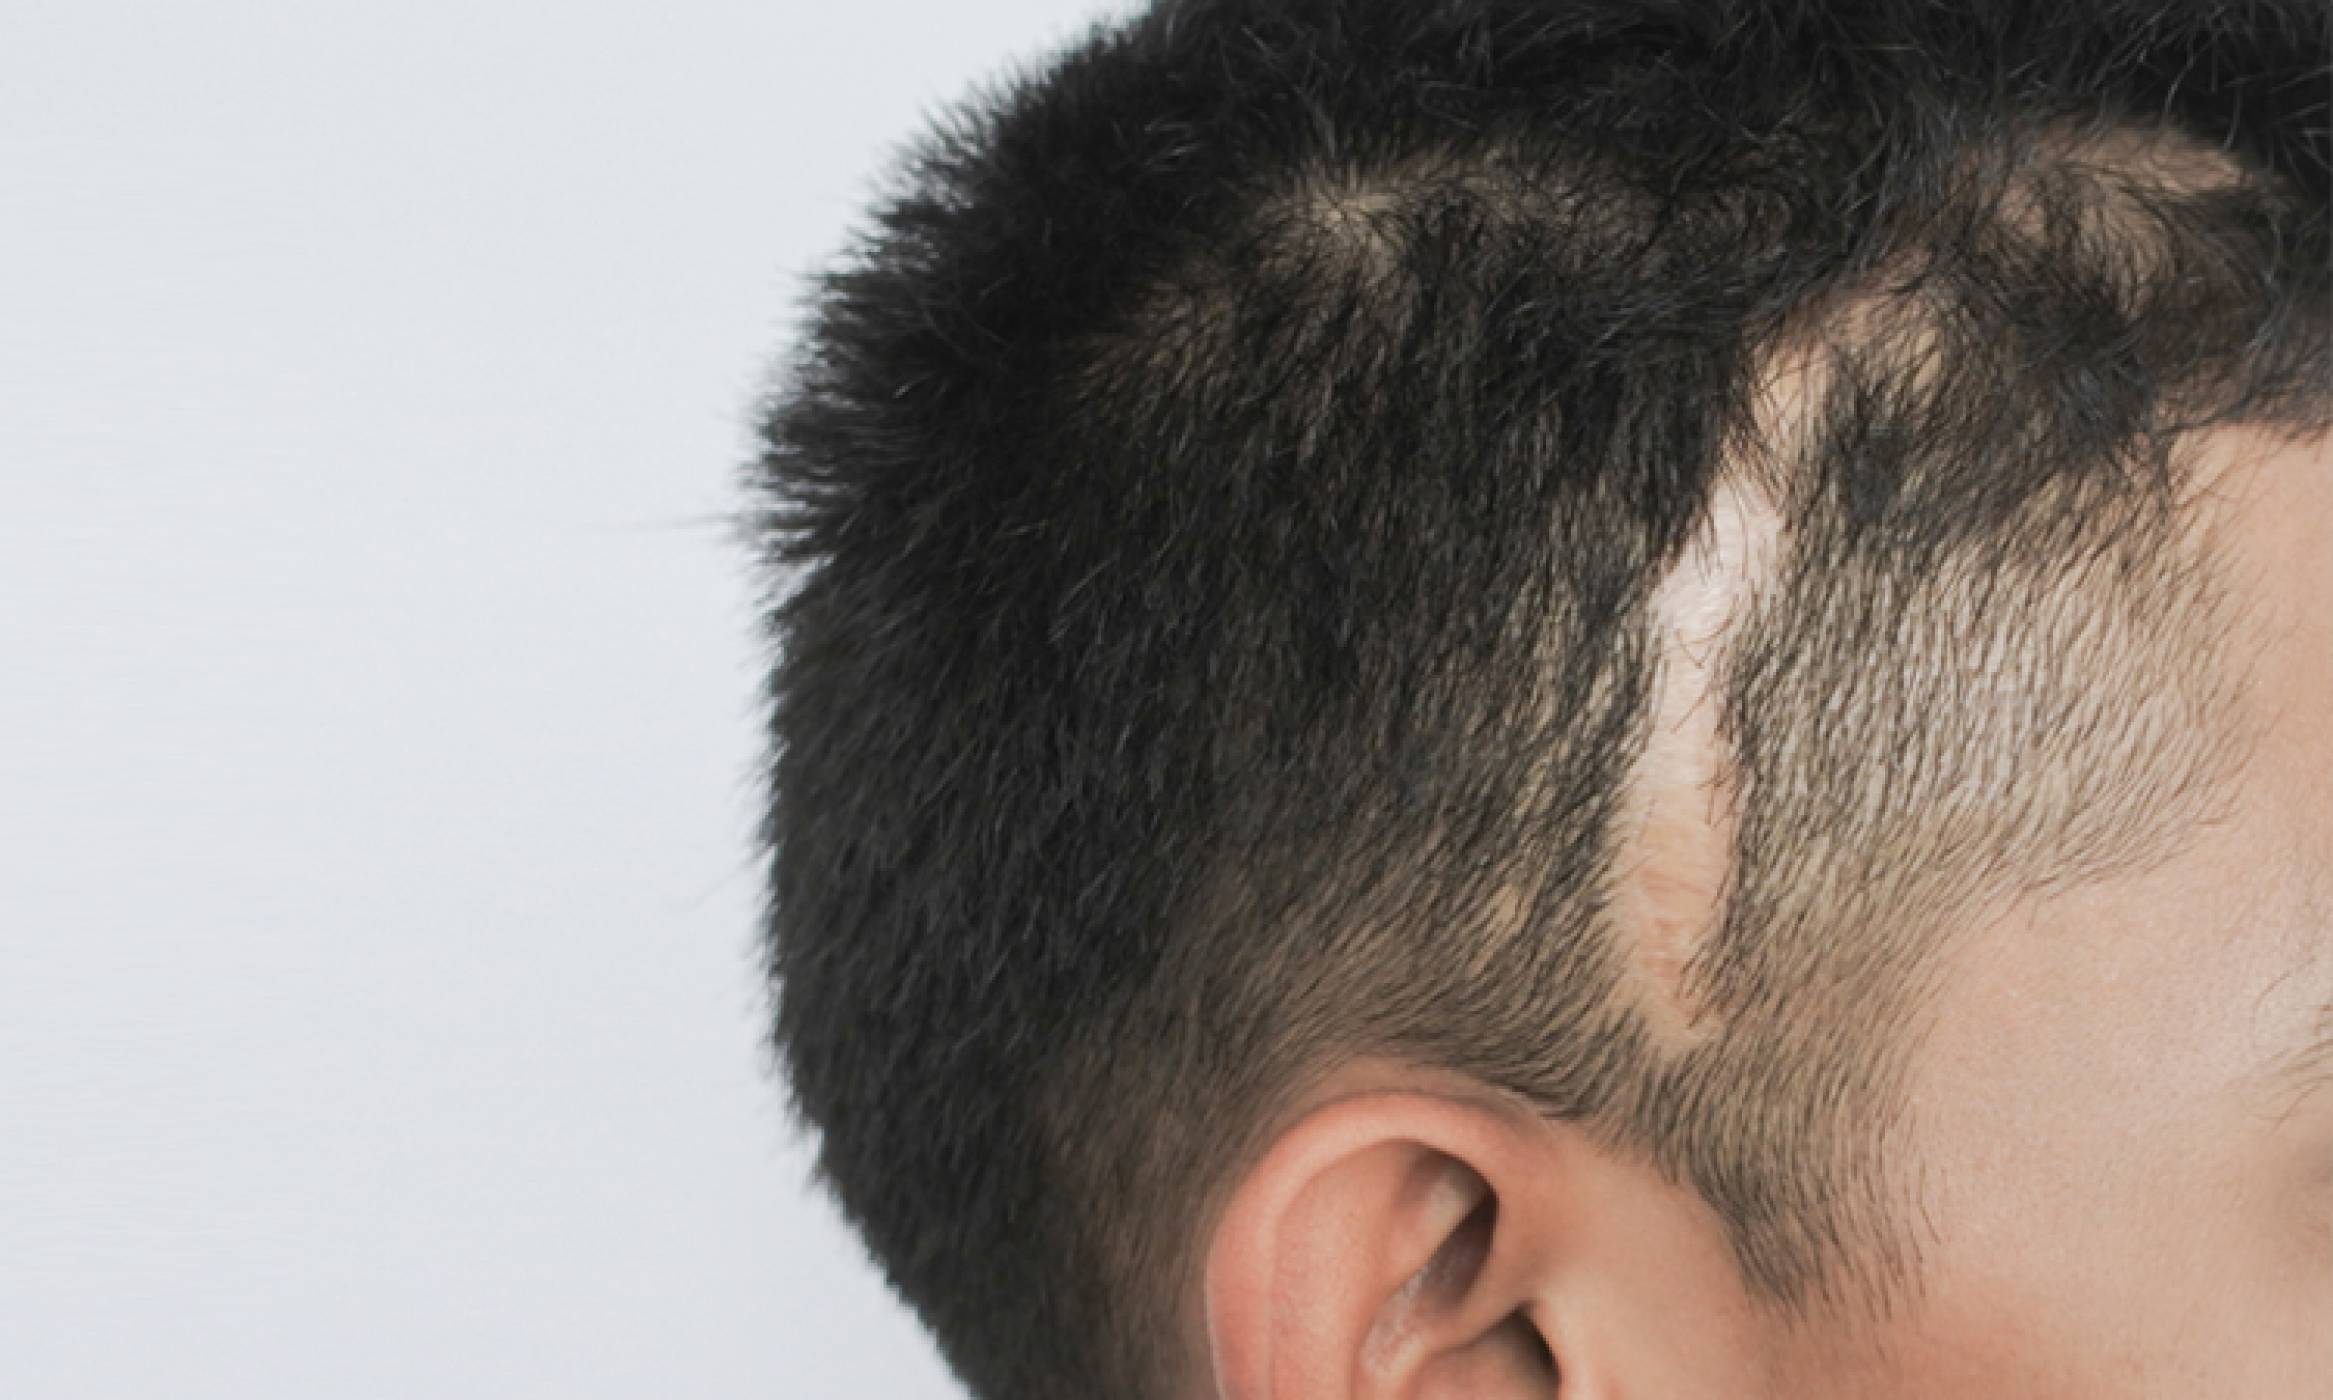 Close-up on a man's head with short hair, showing a large scar across his scalp, making him a good candidate for a scar revision procedure